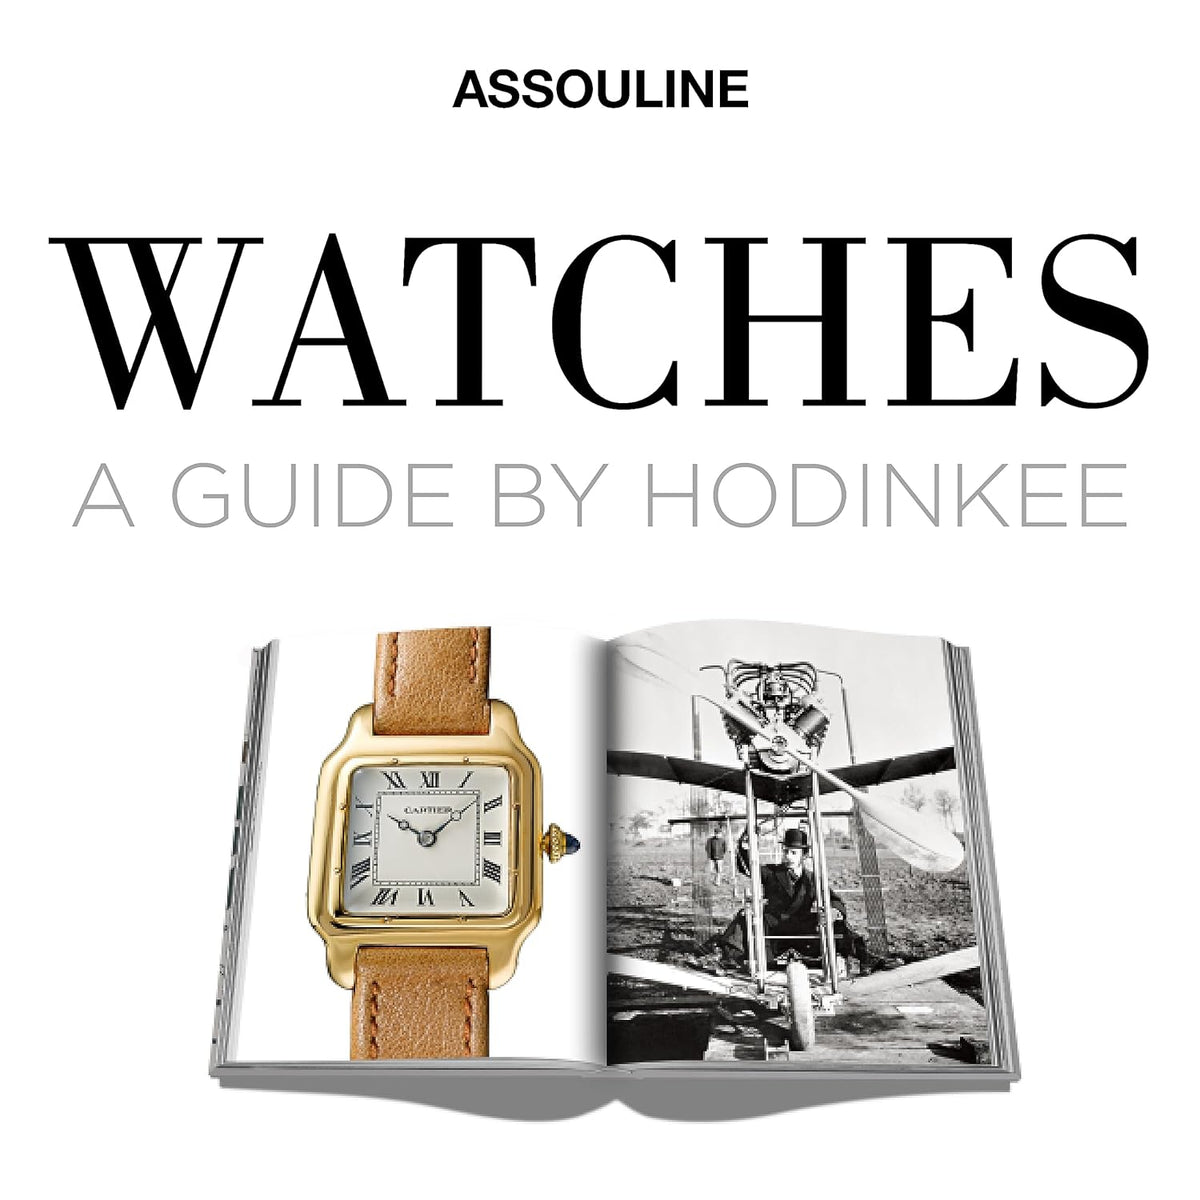 Watches: A Guide By Hodinkee - Assouline coffee table book